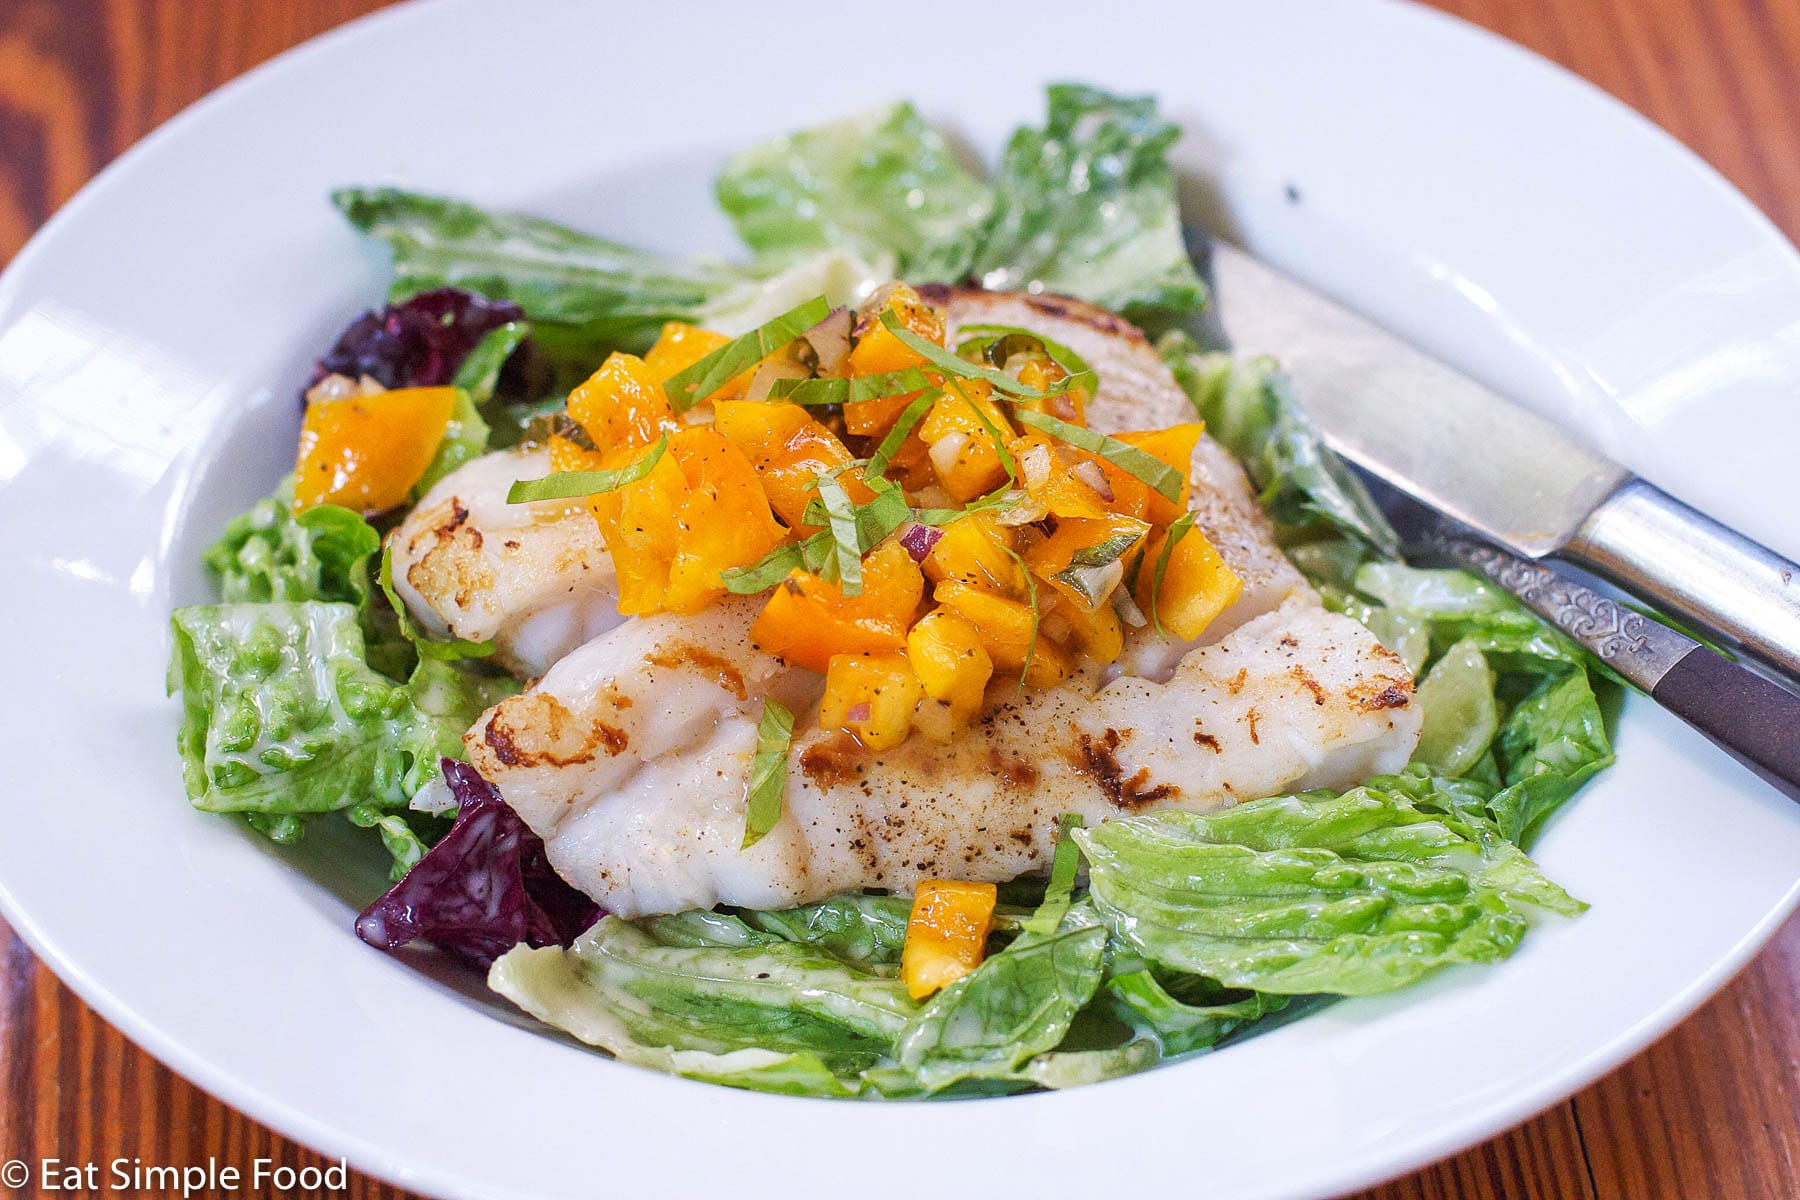 Seared piece of white fish and a bed of romaine lettuce with chunked yellow tomato and sliced basil salsa. White plate with knife and fork on the side.